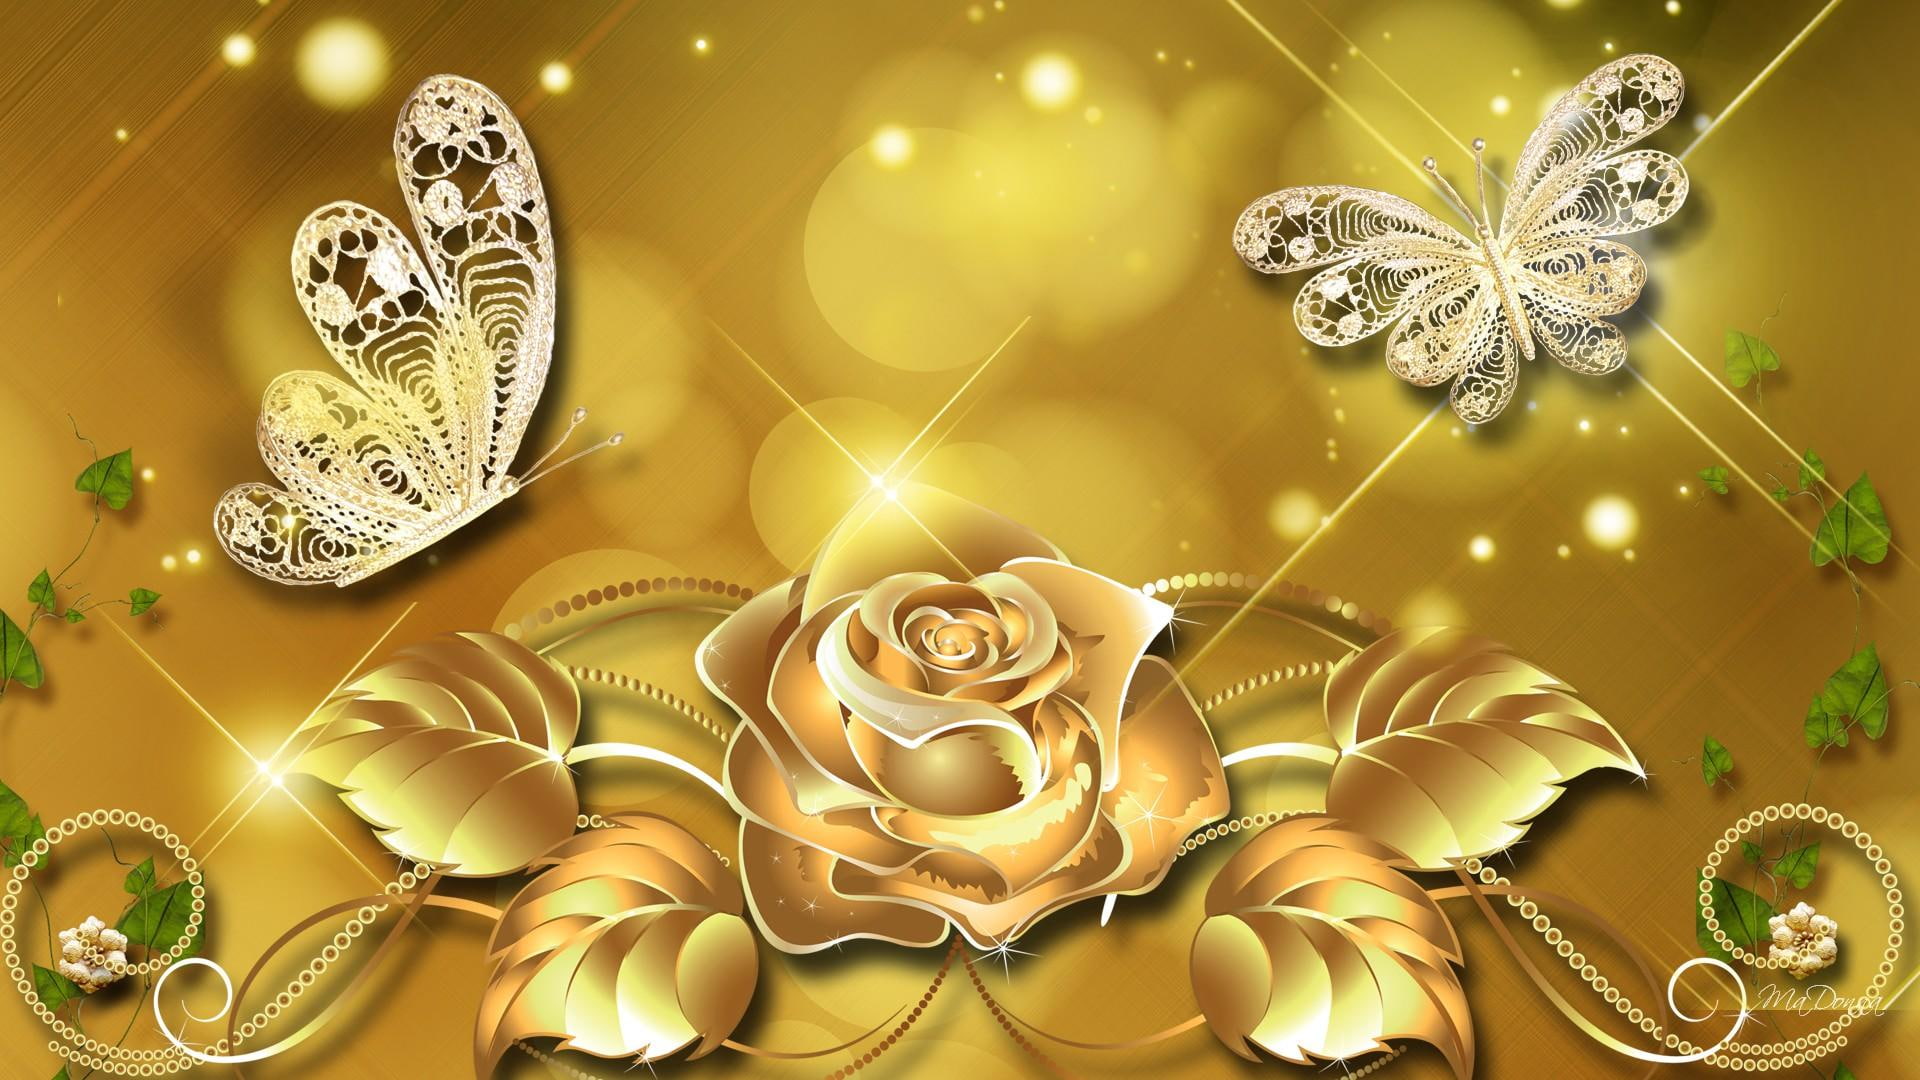 Luxurious Gold, flower and butterfly with yellow background illustration